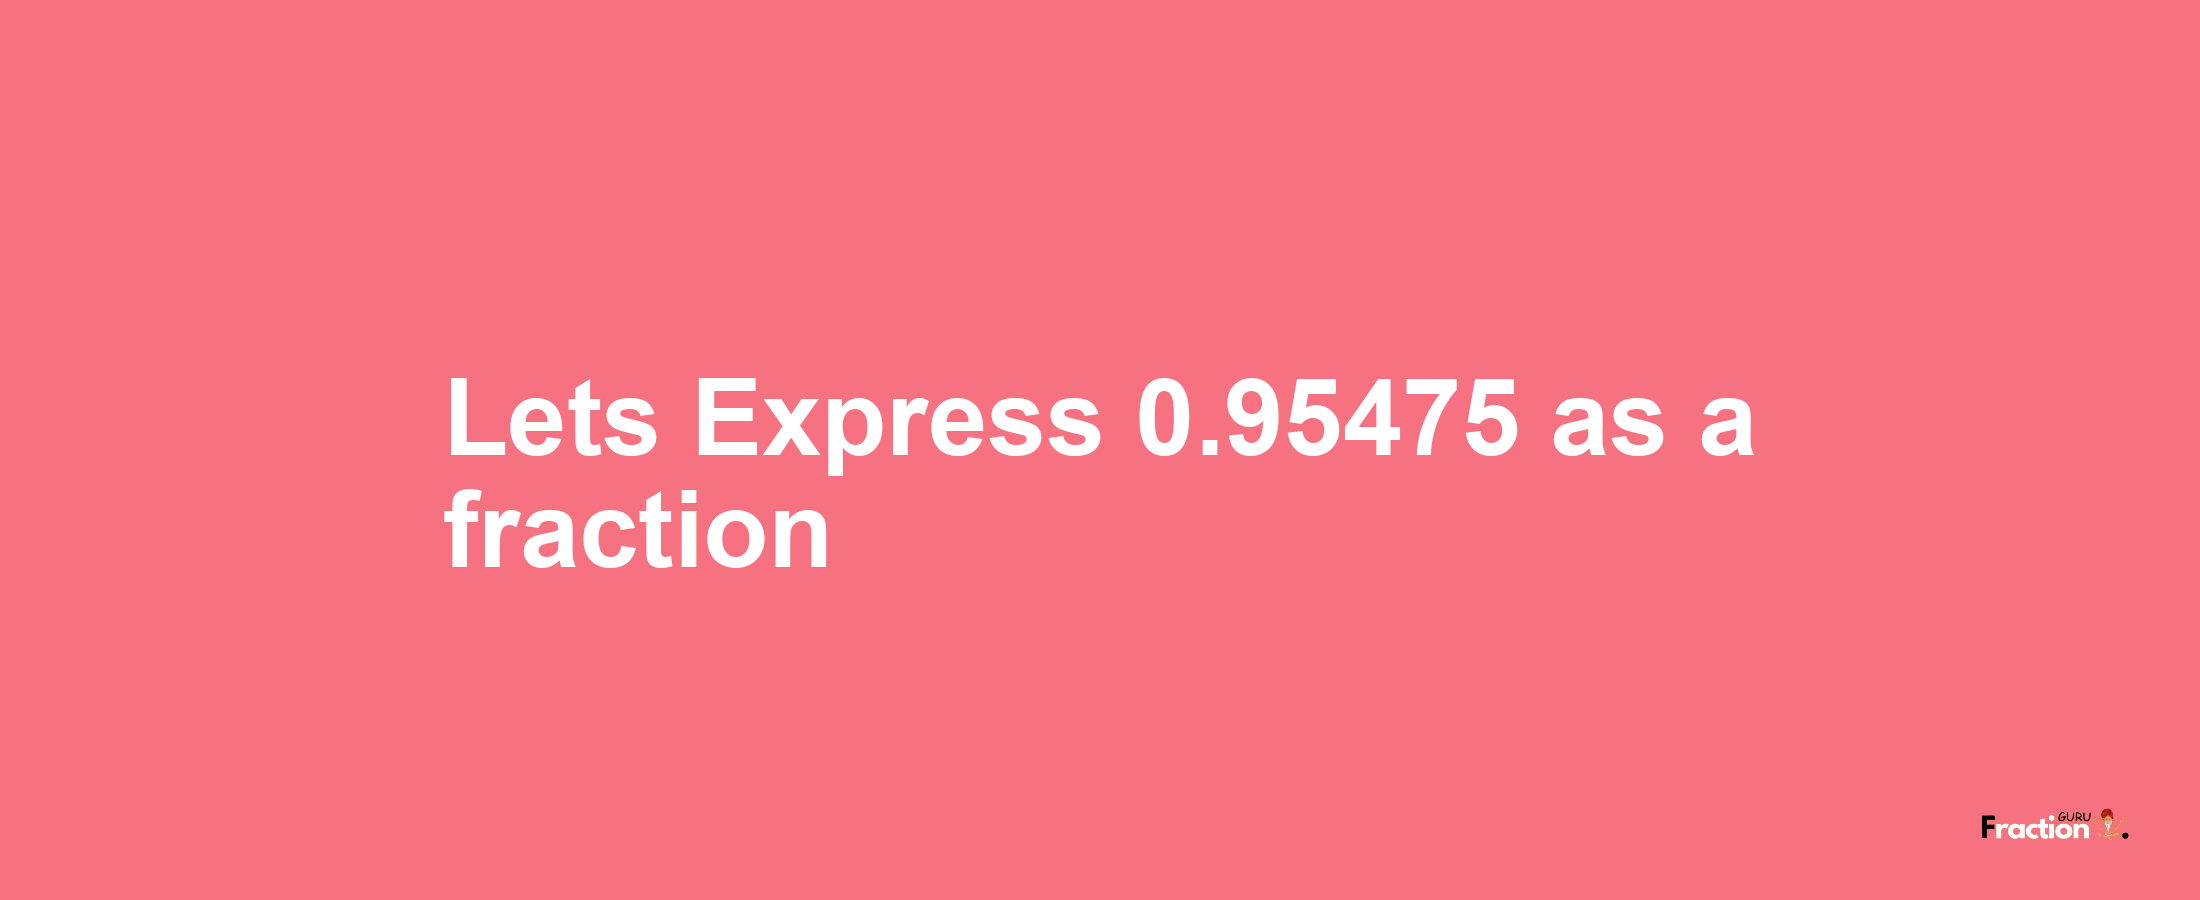 Lets Express 0.95475 as afraction